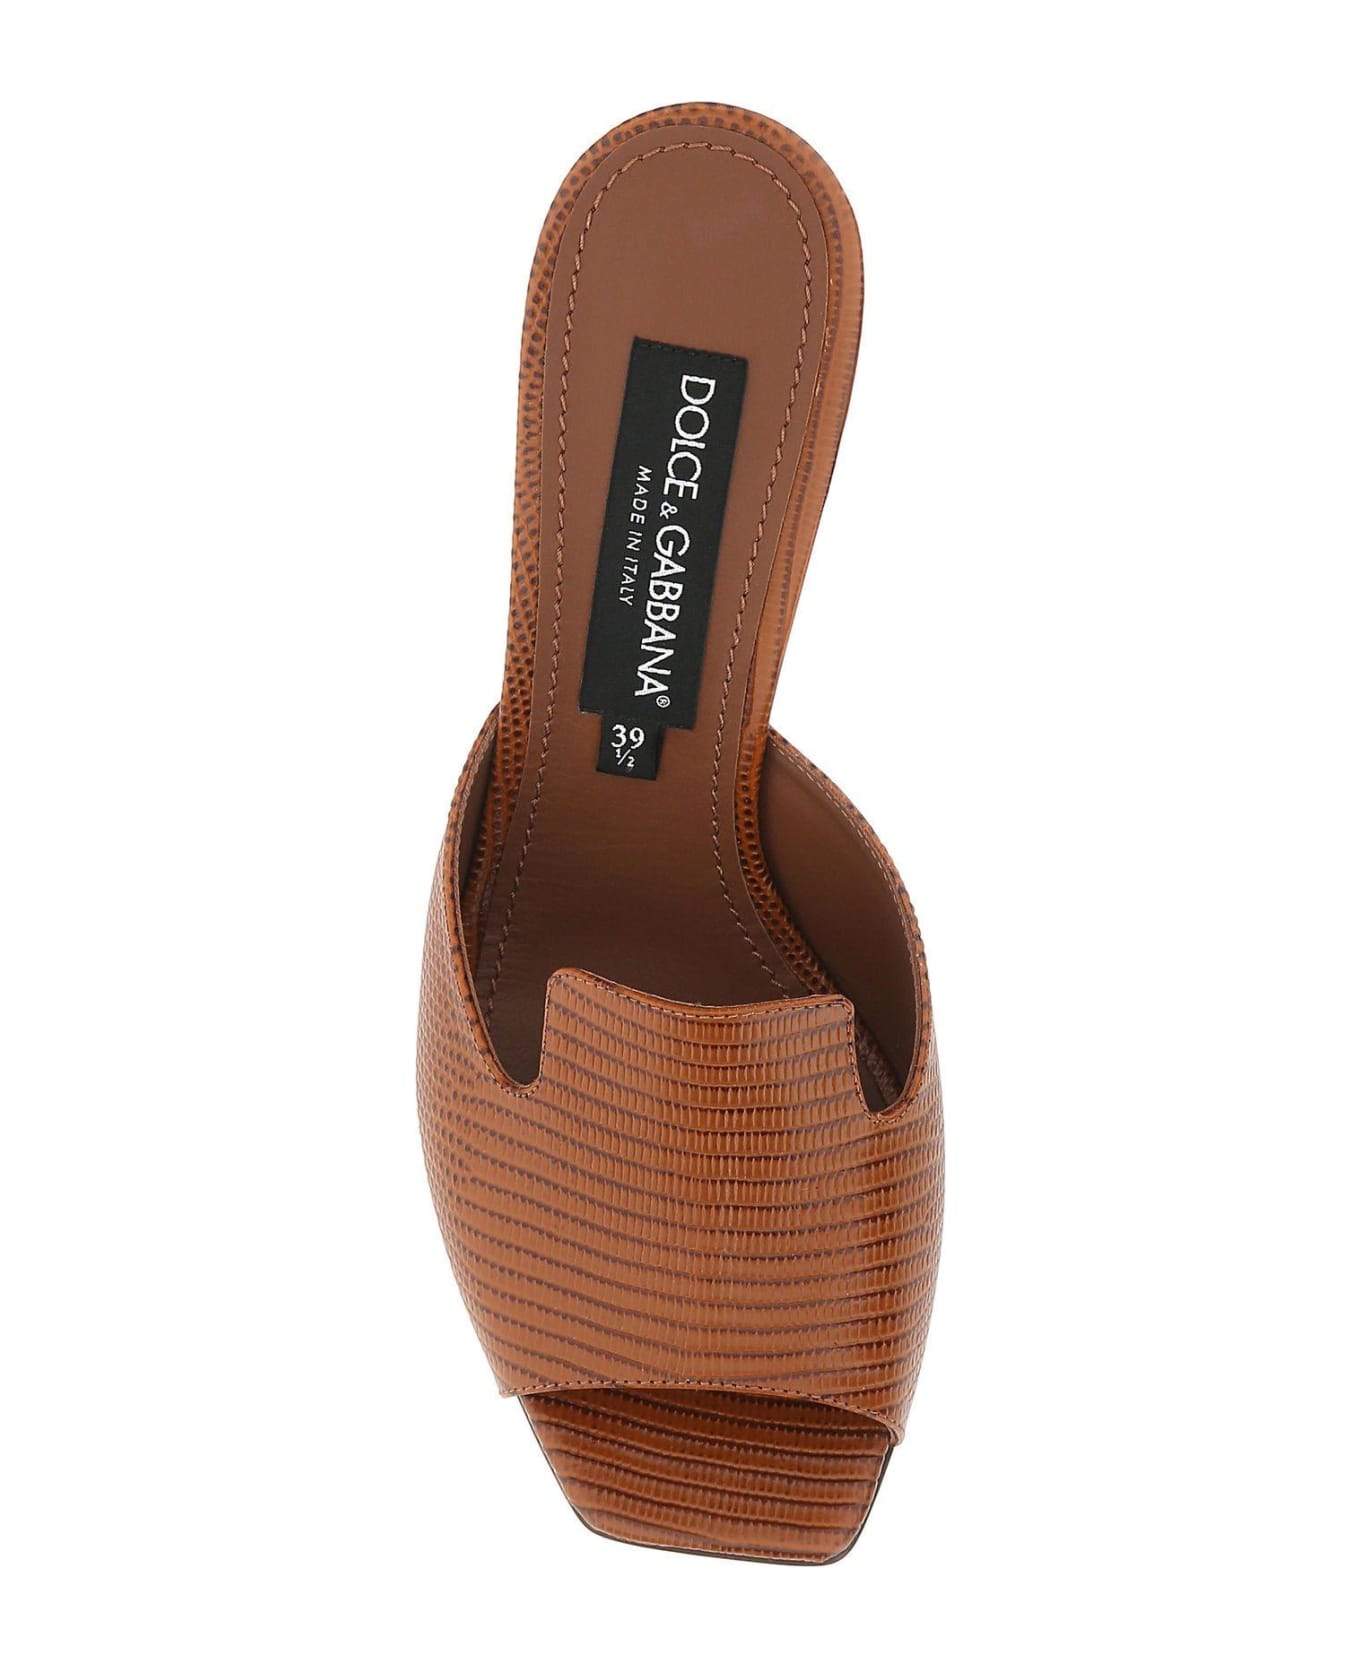 Dolce & Gabbana Brown Leather Mules - Cuoio